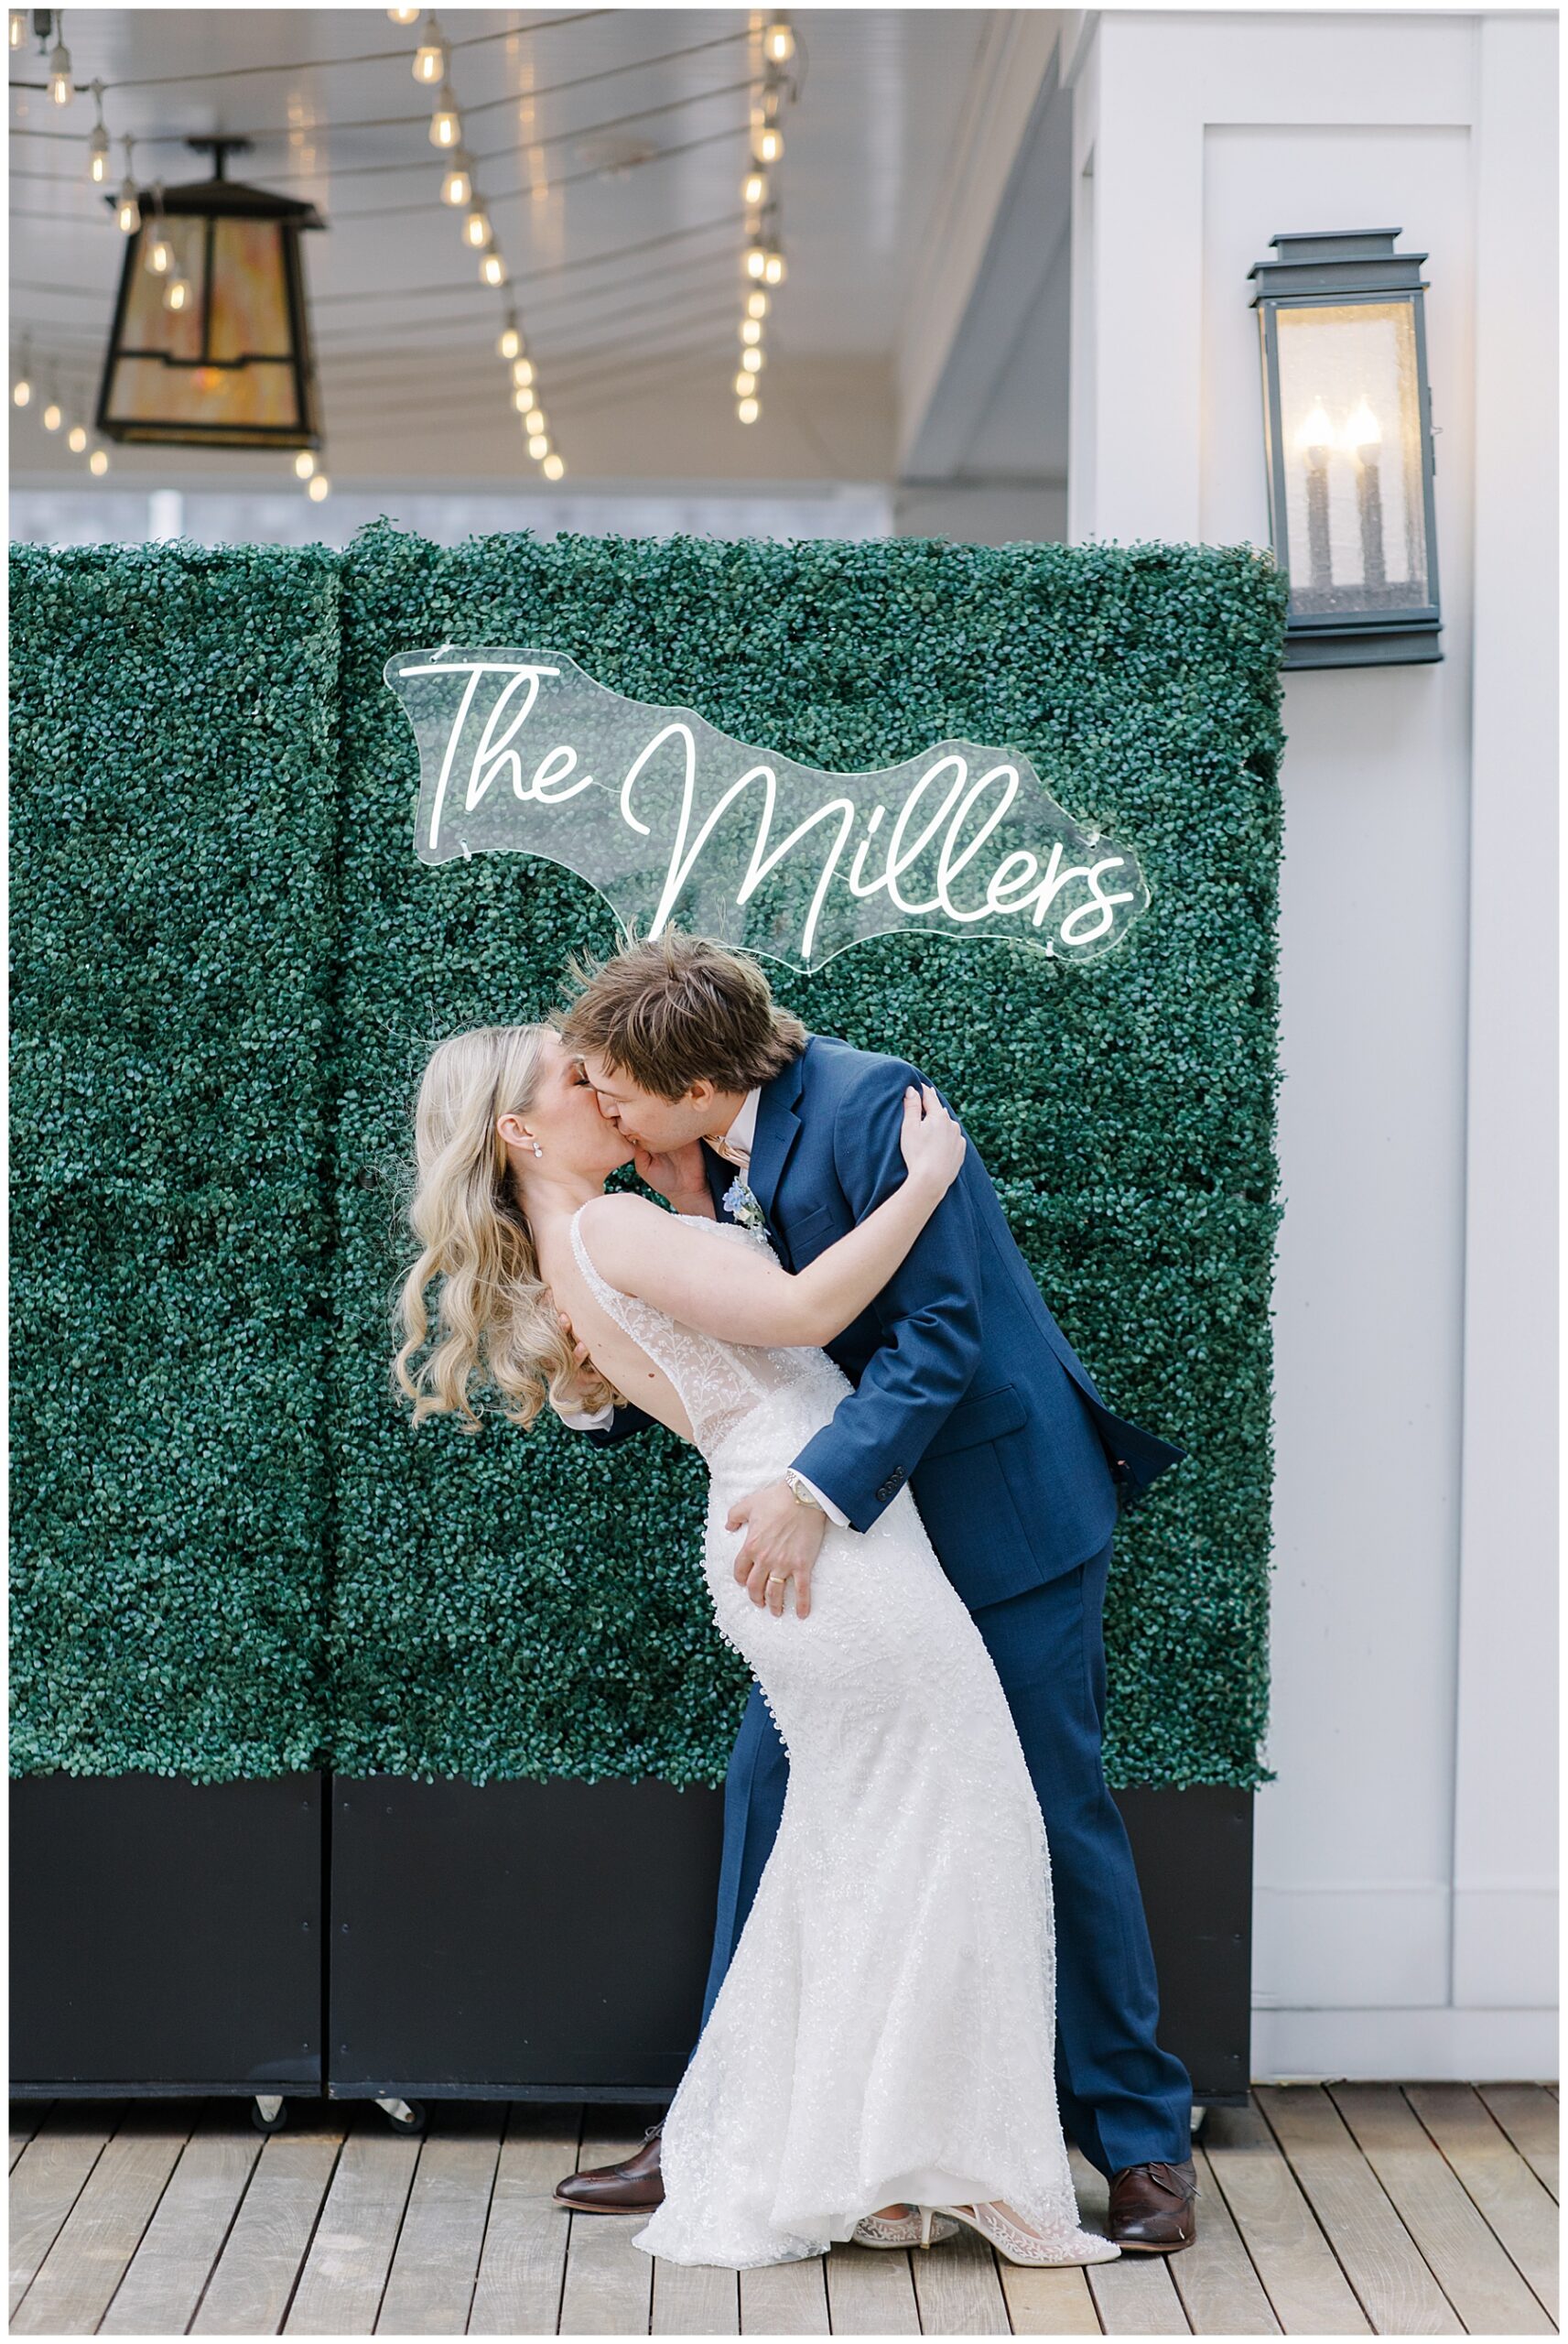 newlyweds kiss under light-up last name sign